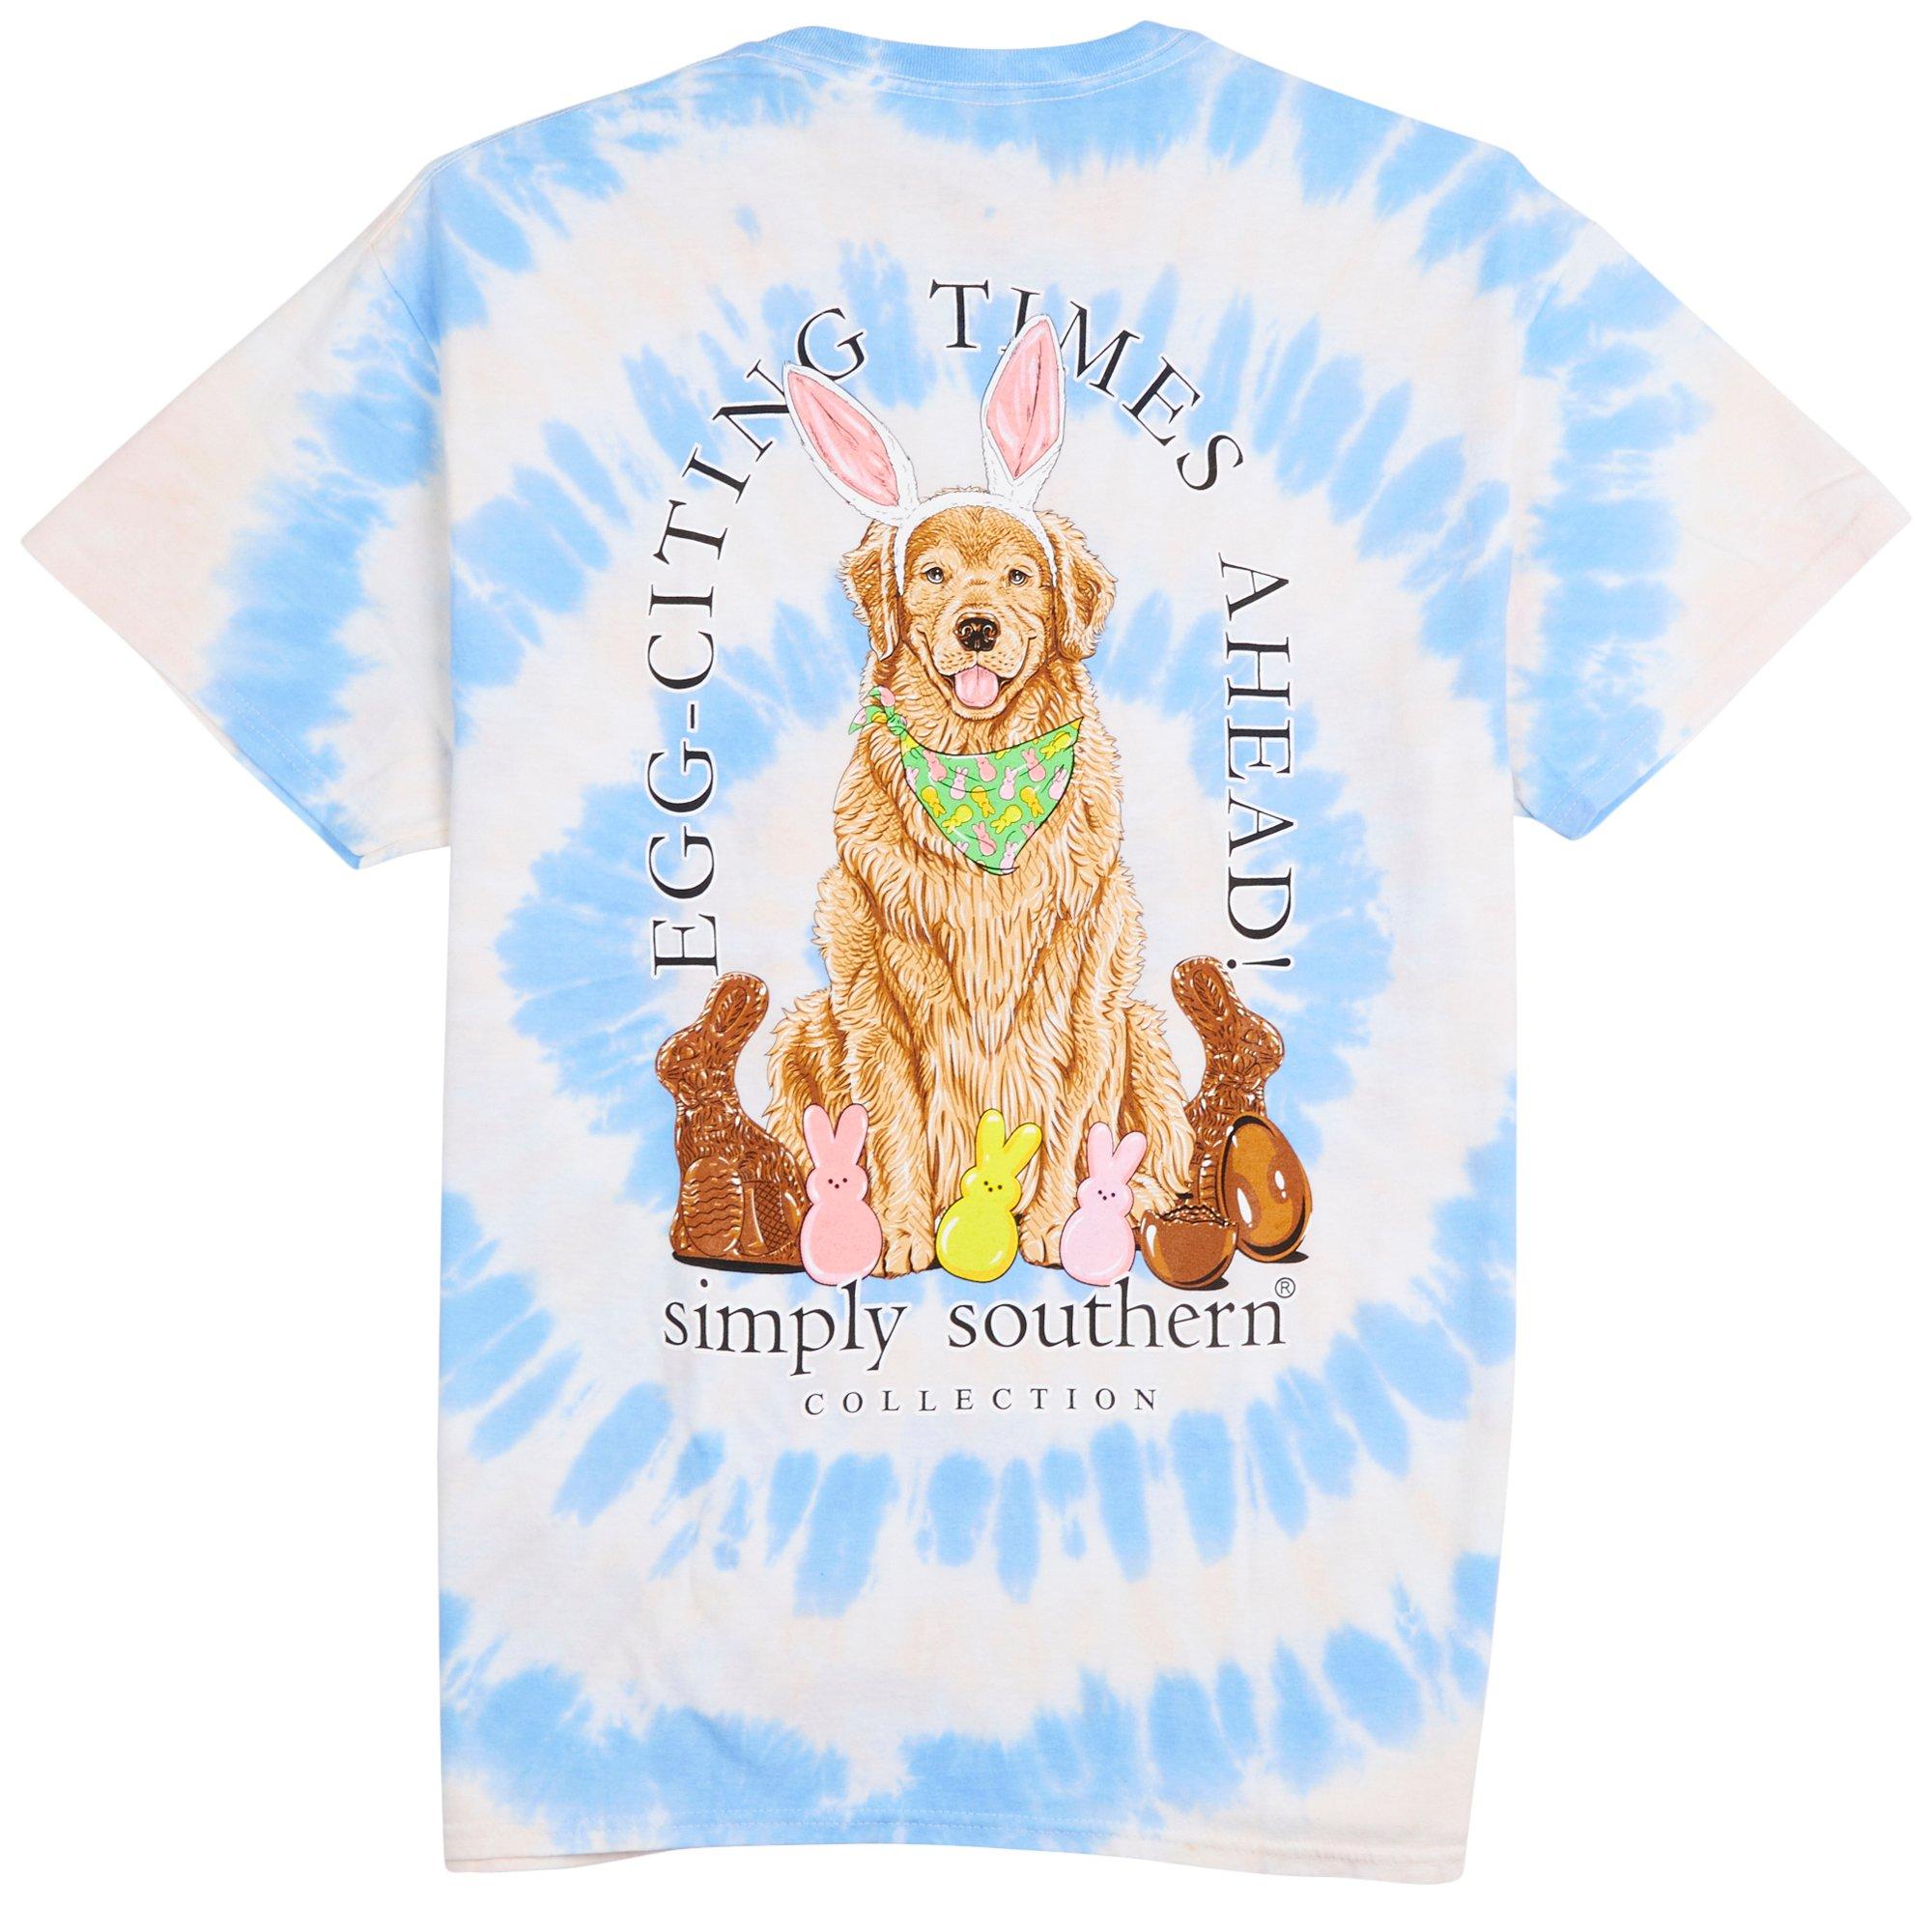 Simply Southern Juniors Easter Dog Short Sleeve Top